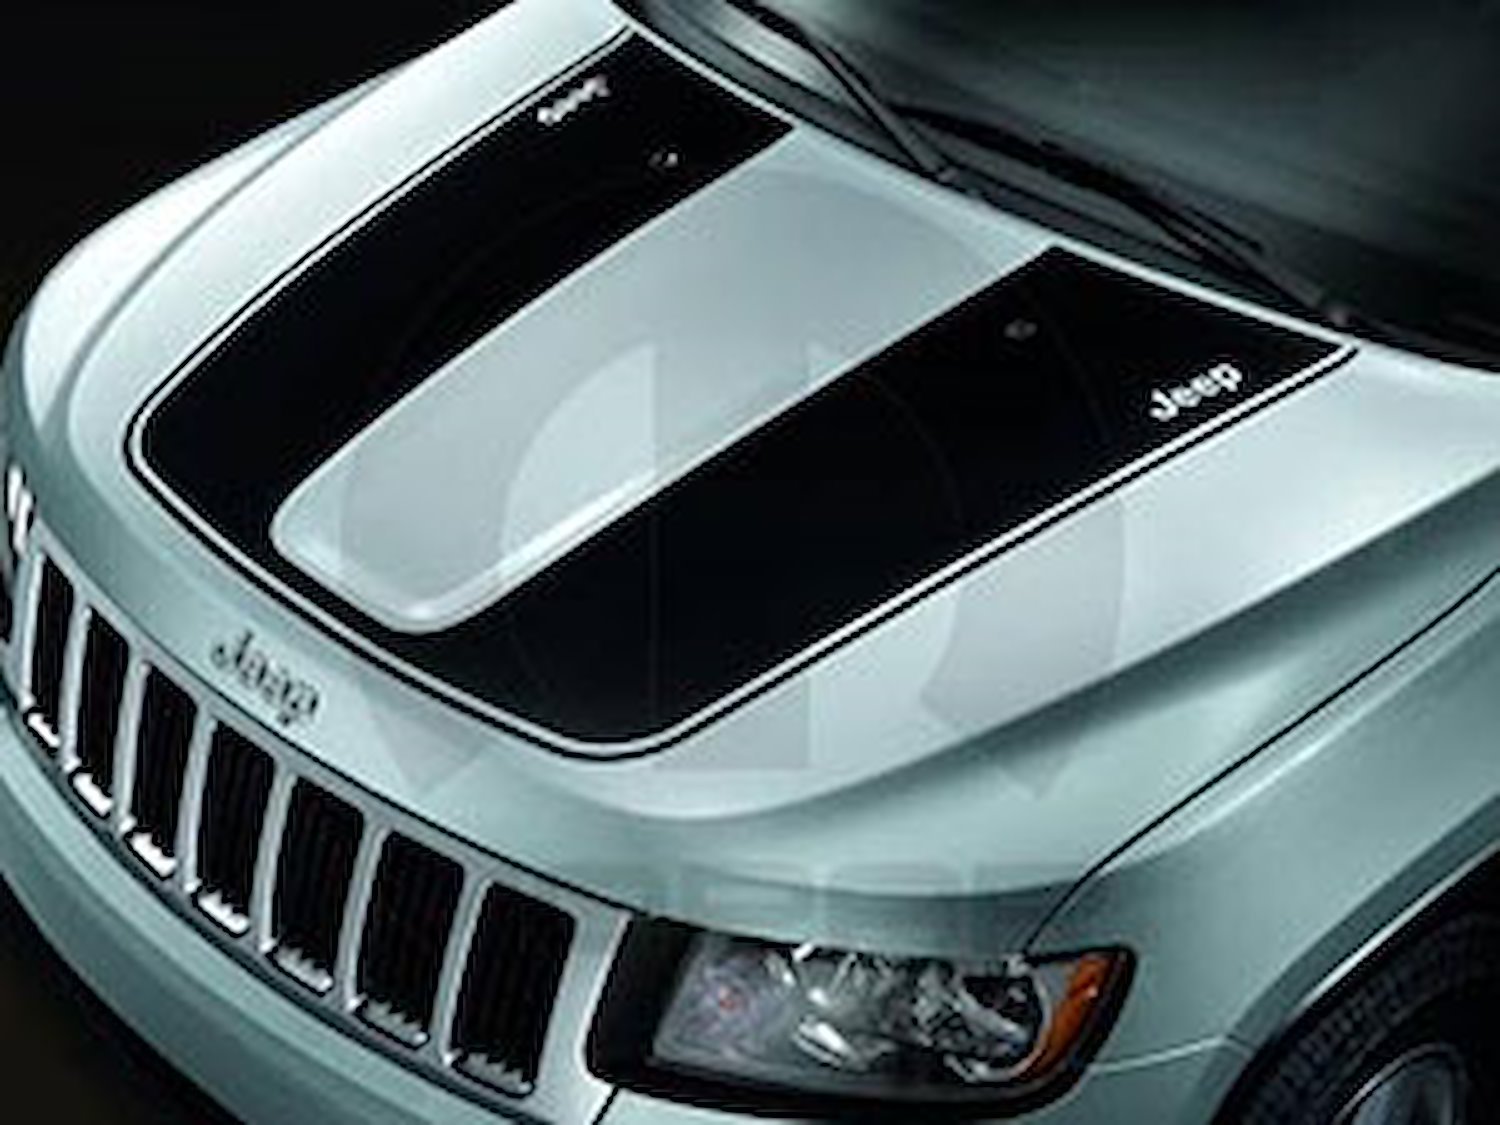 Applique/Decal Kit 2011-14 Jeep Grand Cherokee